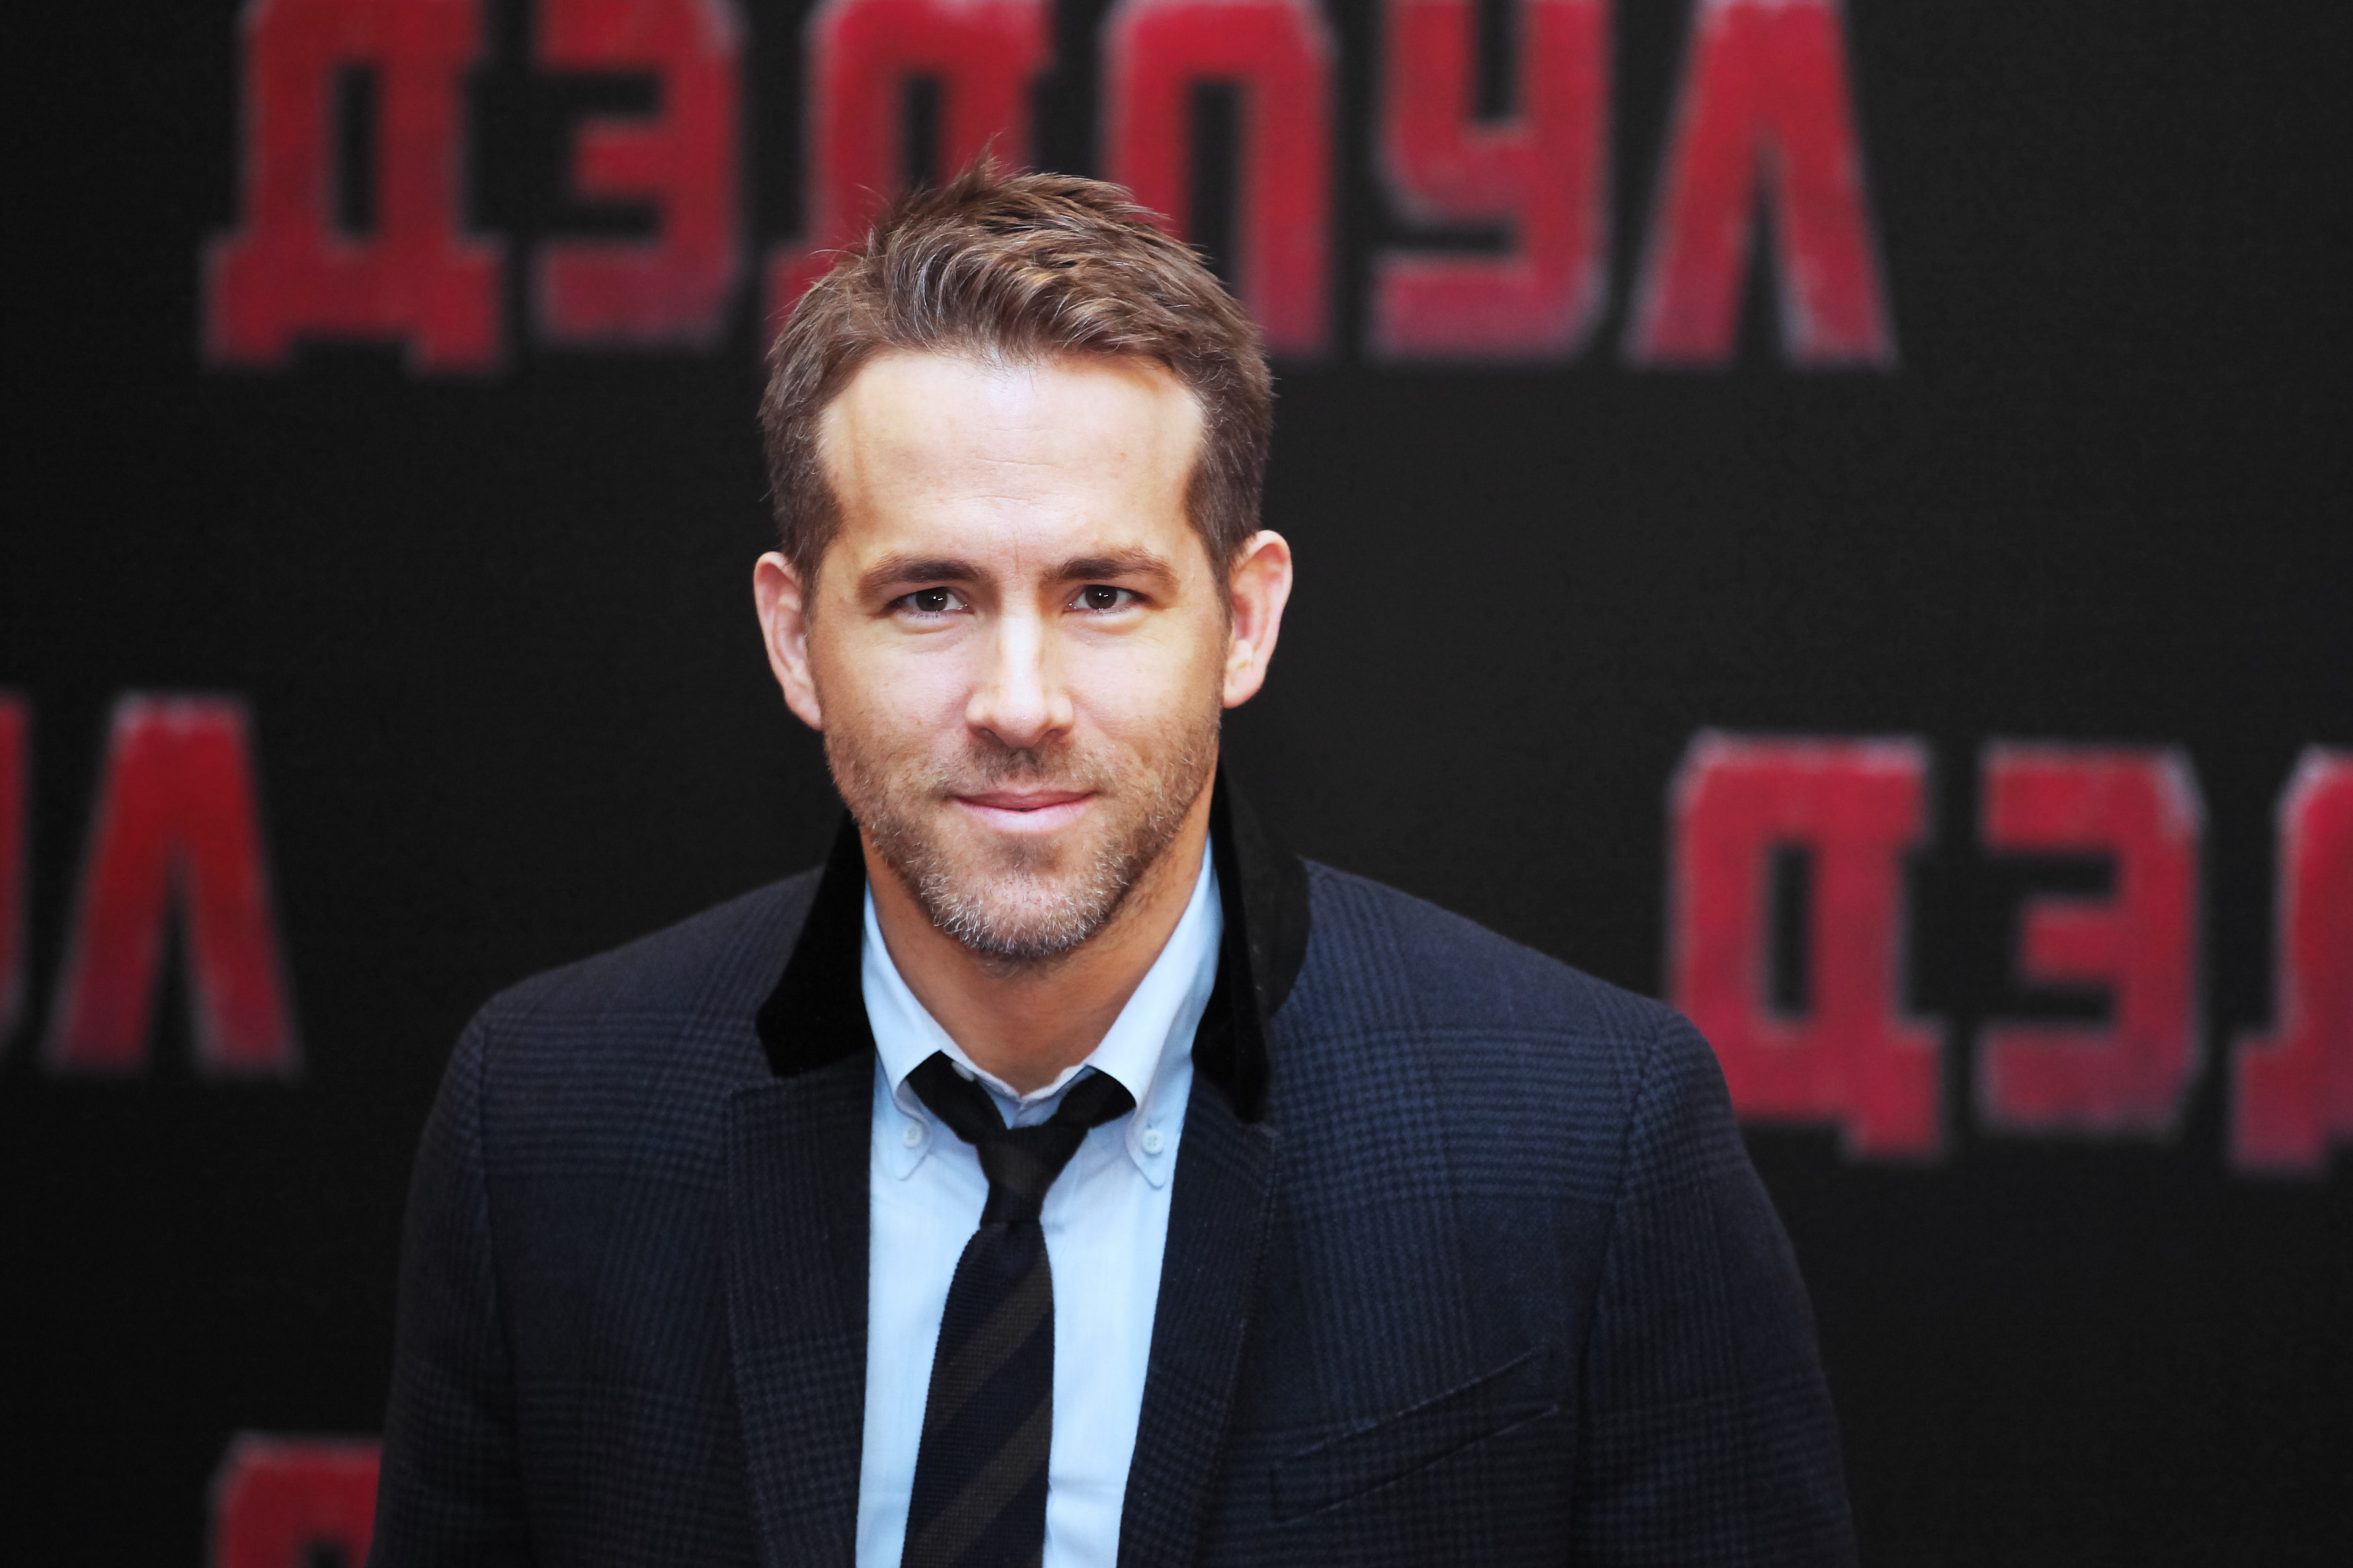 Ryan Reynolds attends a photocall for 'Deadpool' at the Ritz Carlton Hotel on January 25, 2016 in Moscow, Russia. (Elena Gorbacheva&mdash;Kommersant/Getty Images)